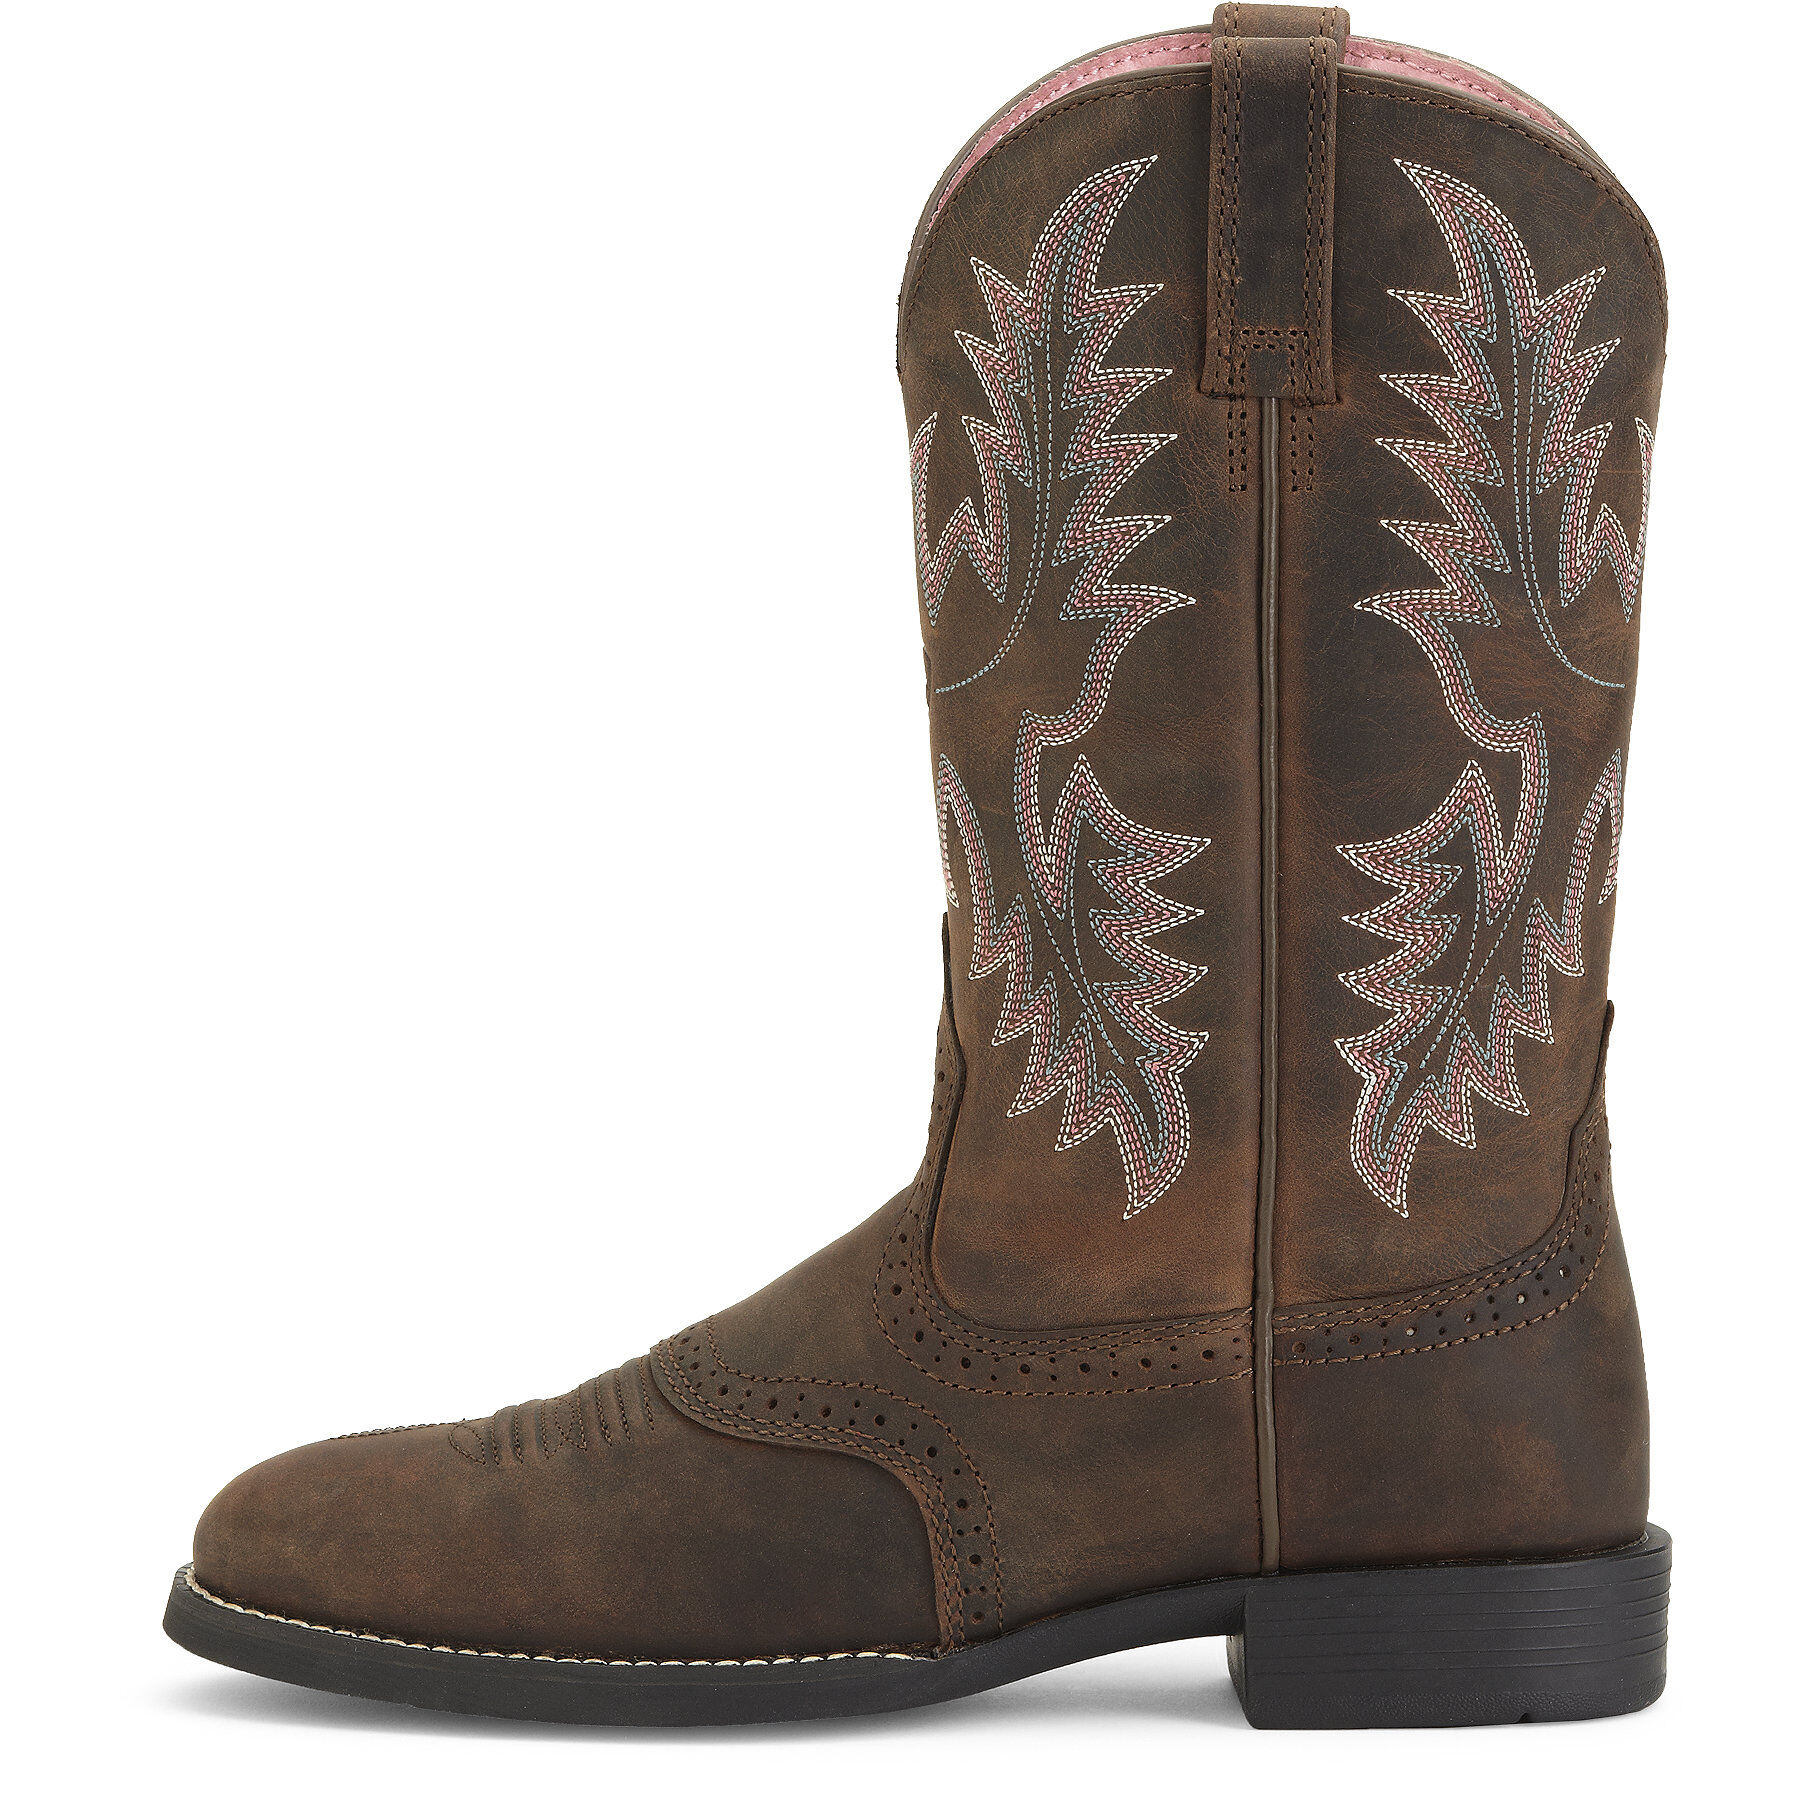 Ariat Boots Western Heritage Cheap Sale | head.hesge.ch